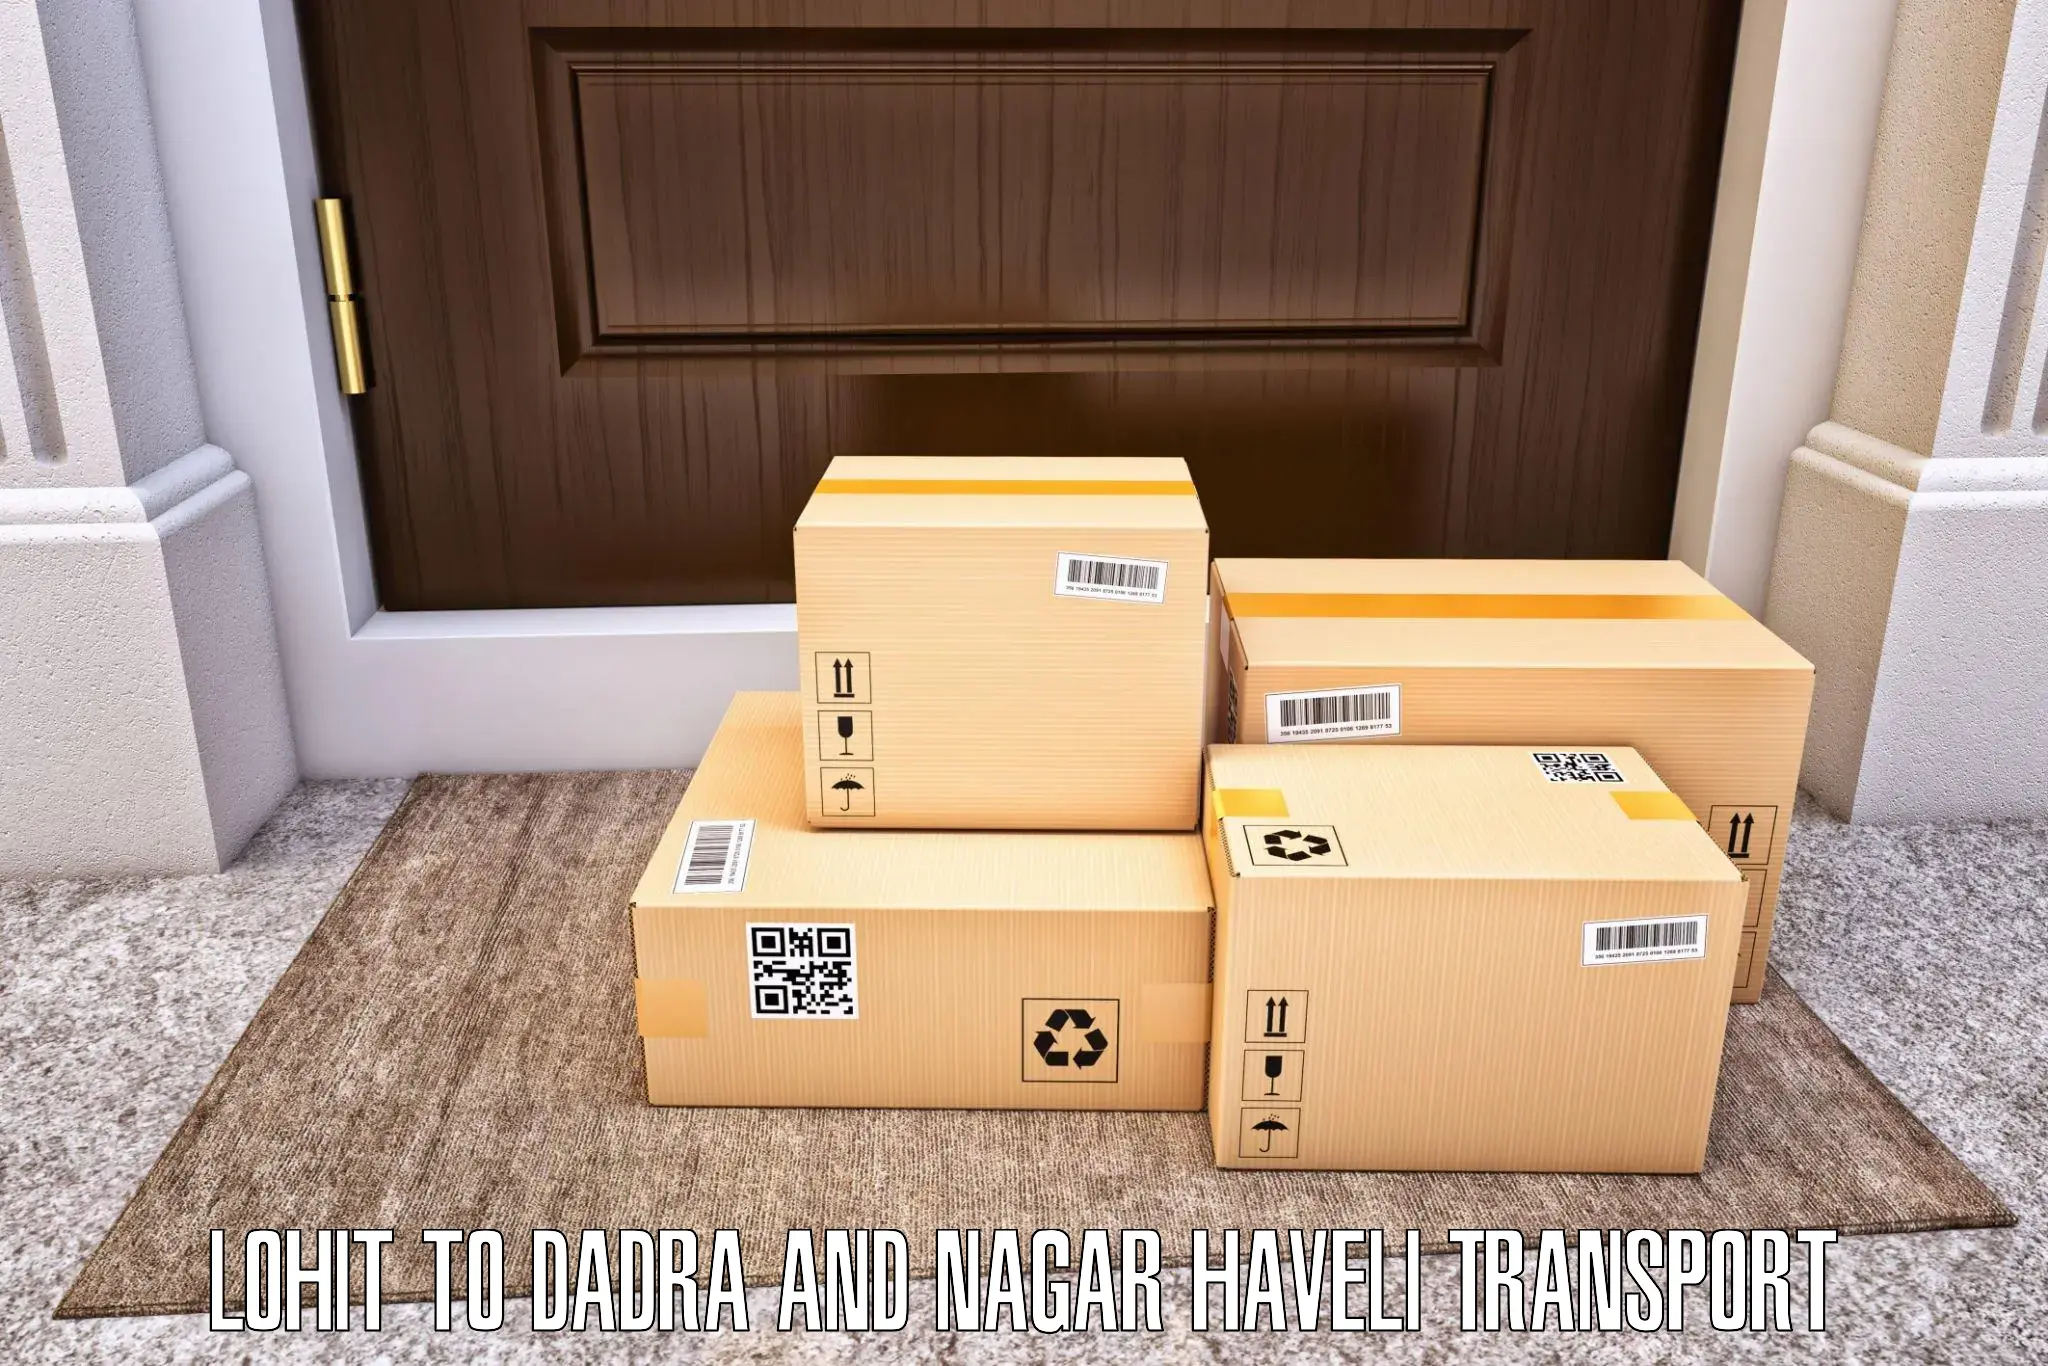 Road transport services Lohit to Dadra and Nagar Haveli